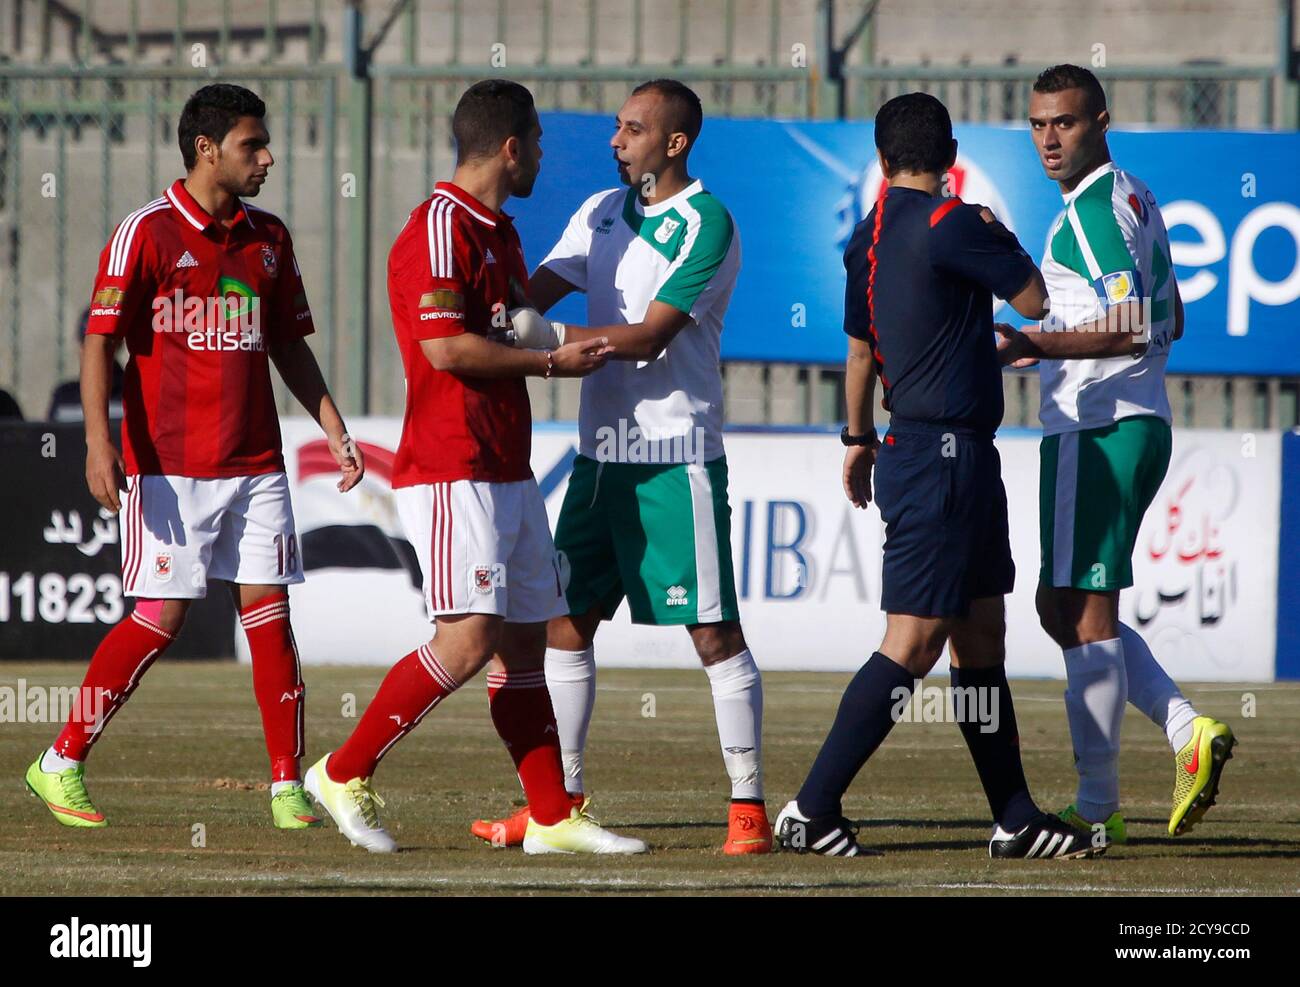 Players Of Al Ahly And Al Masry Argue During Their Egyptian Premier League Soccer Match At El Gouna Stadium In Hurghada January 10 2015 Egyptian Authorities Will Partially Lift A Ban On Supporters